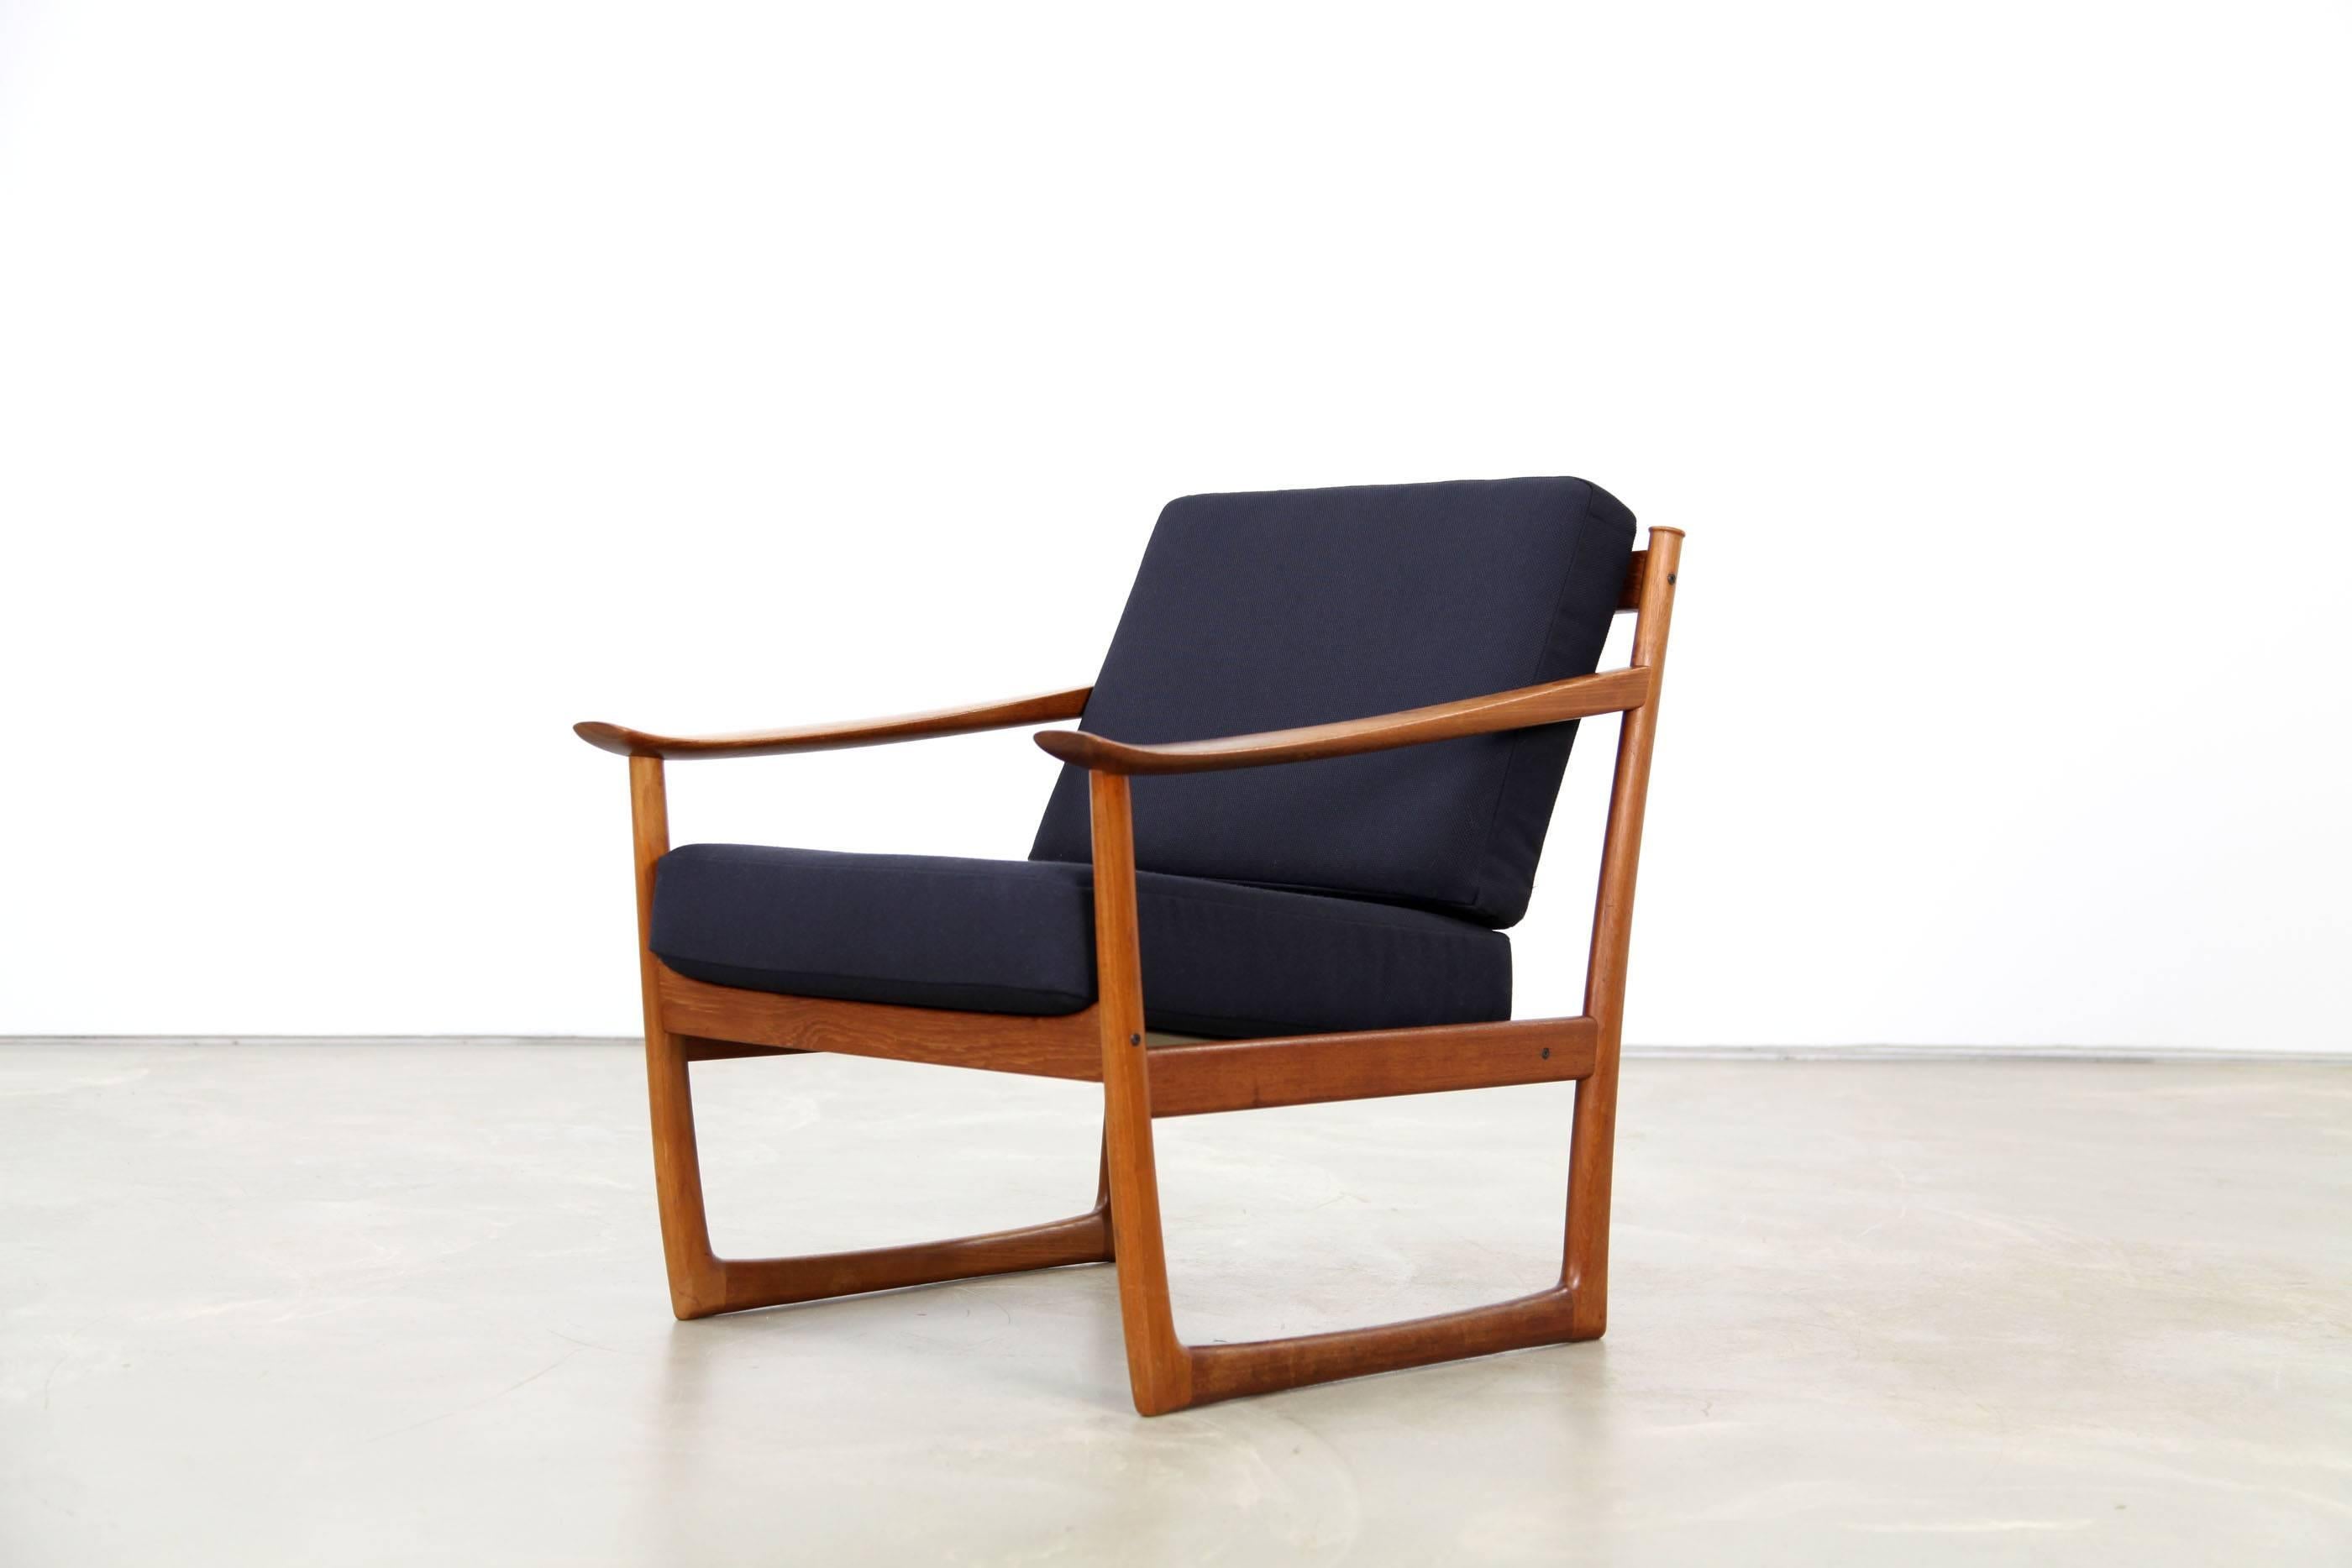 Beautifully shaped teak chair by the Danish designer duo Peter Hvidt and Orla Molgaard Nielsen. Flowing, organic design. The chair is in excellent condition, it was reupholstered with the fabric Steelcut by Kvadrat.